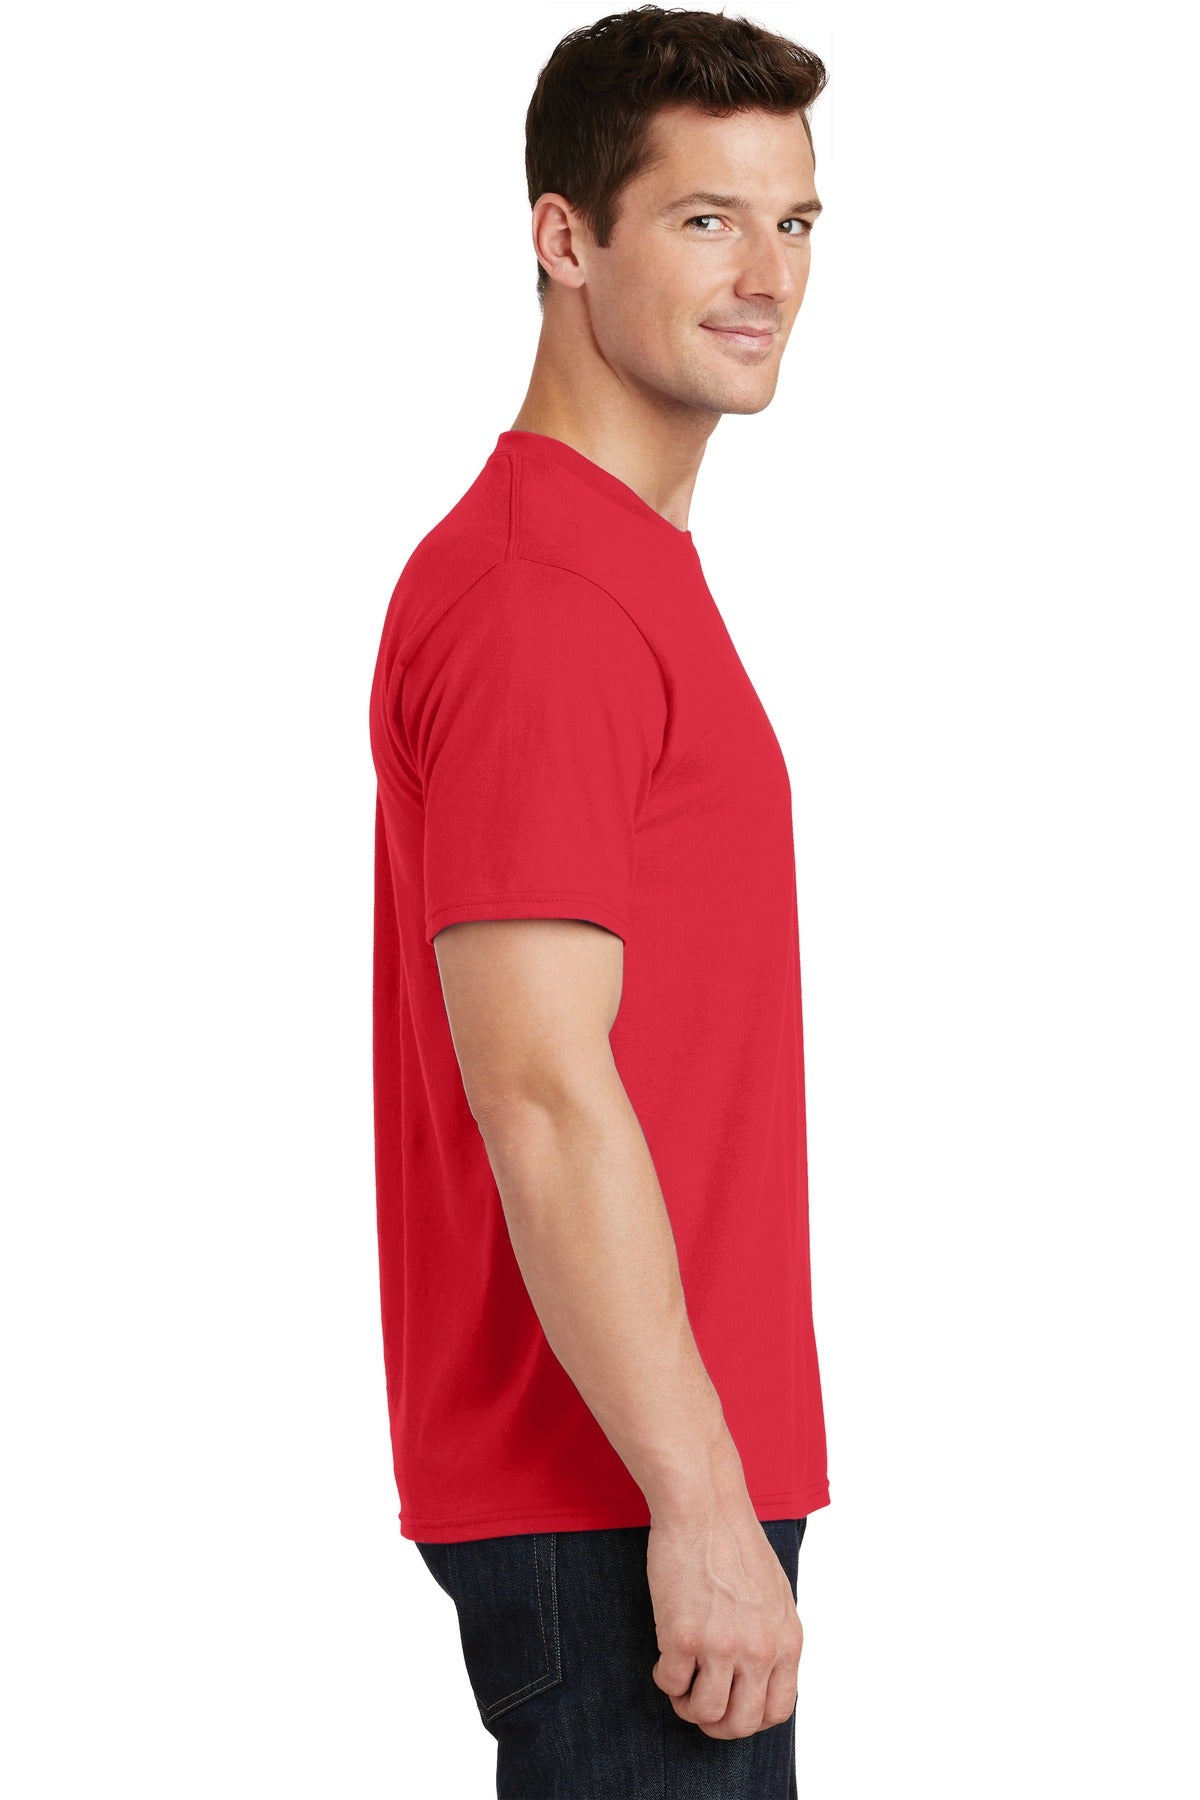 Port & Company® Fan Favorite Tee. PC450 [Athletic Red] - DFW Impression